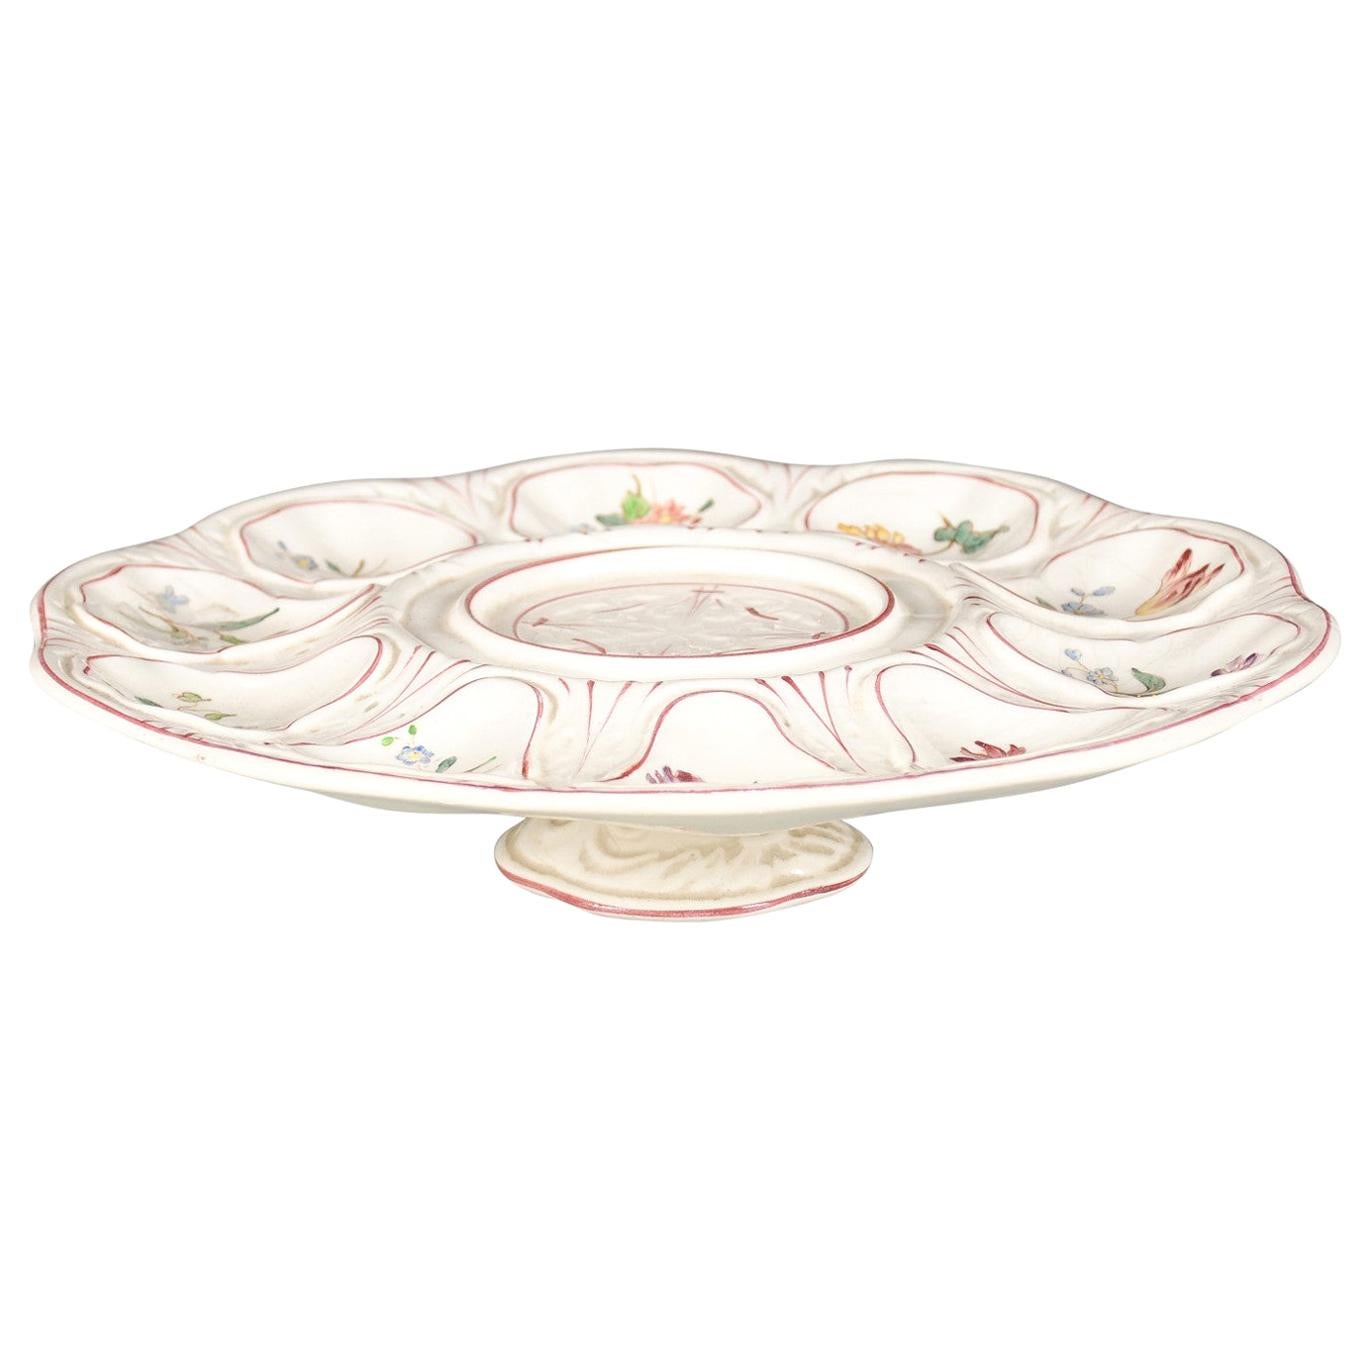 French 1880s Longchamp Majolica Oyster Platter with Floral Décor and Petite Base